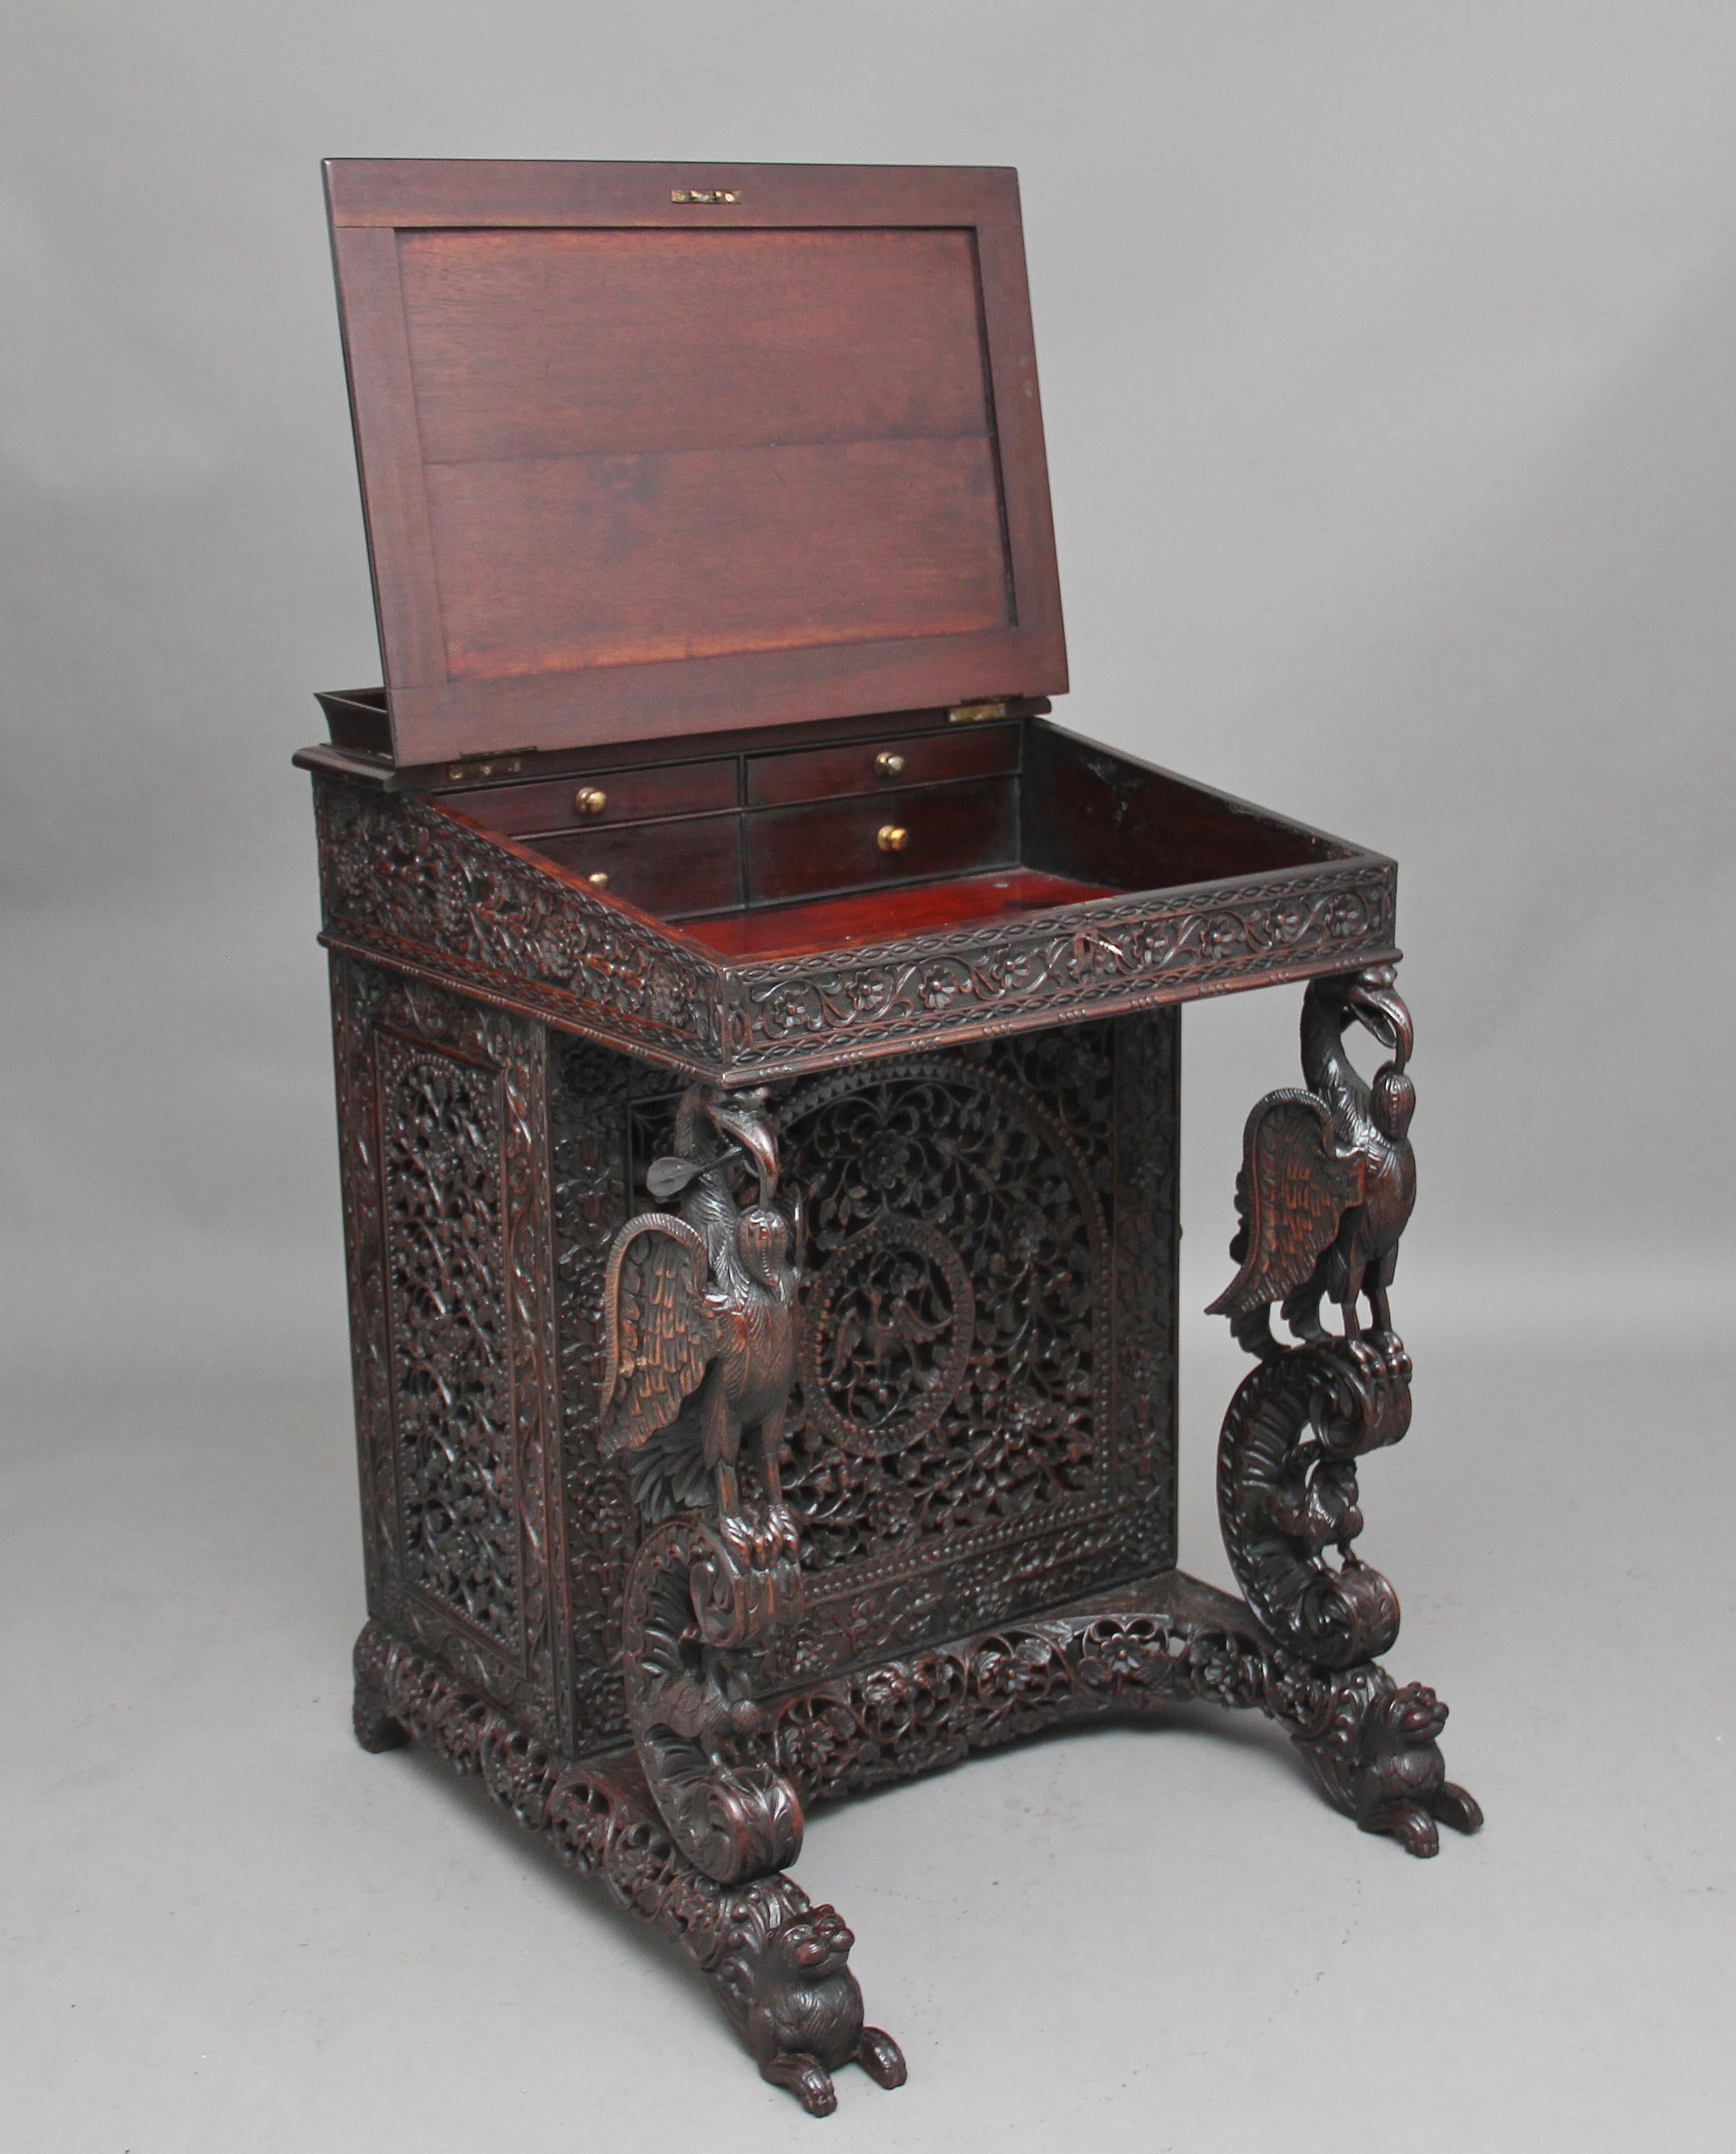 A superb quality 19th century carved teak Anglo-Indian davenport, profusely carved all over with pierced and carved flowers, foliage and vines, the sloping top having a raised gallery, a green leather writing surface decorated with blind and gold